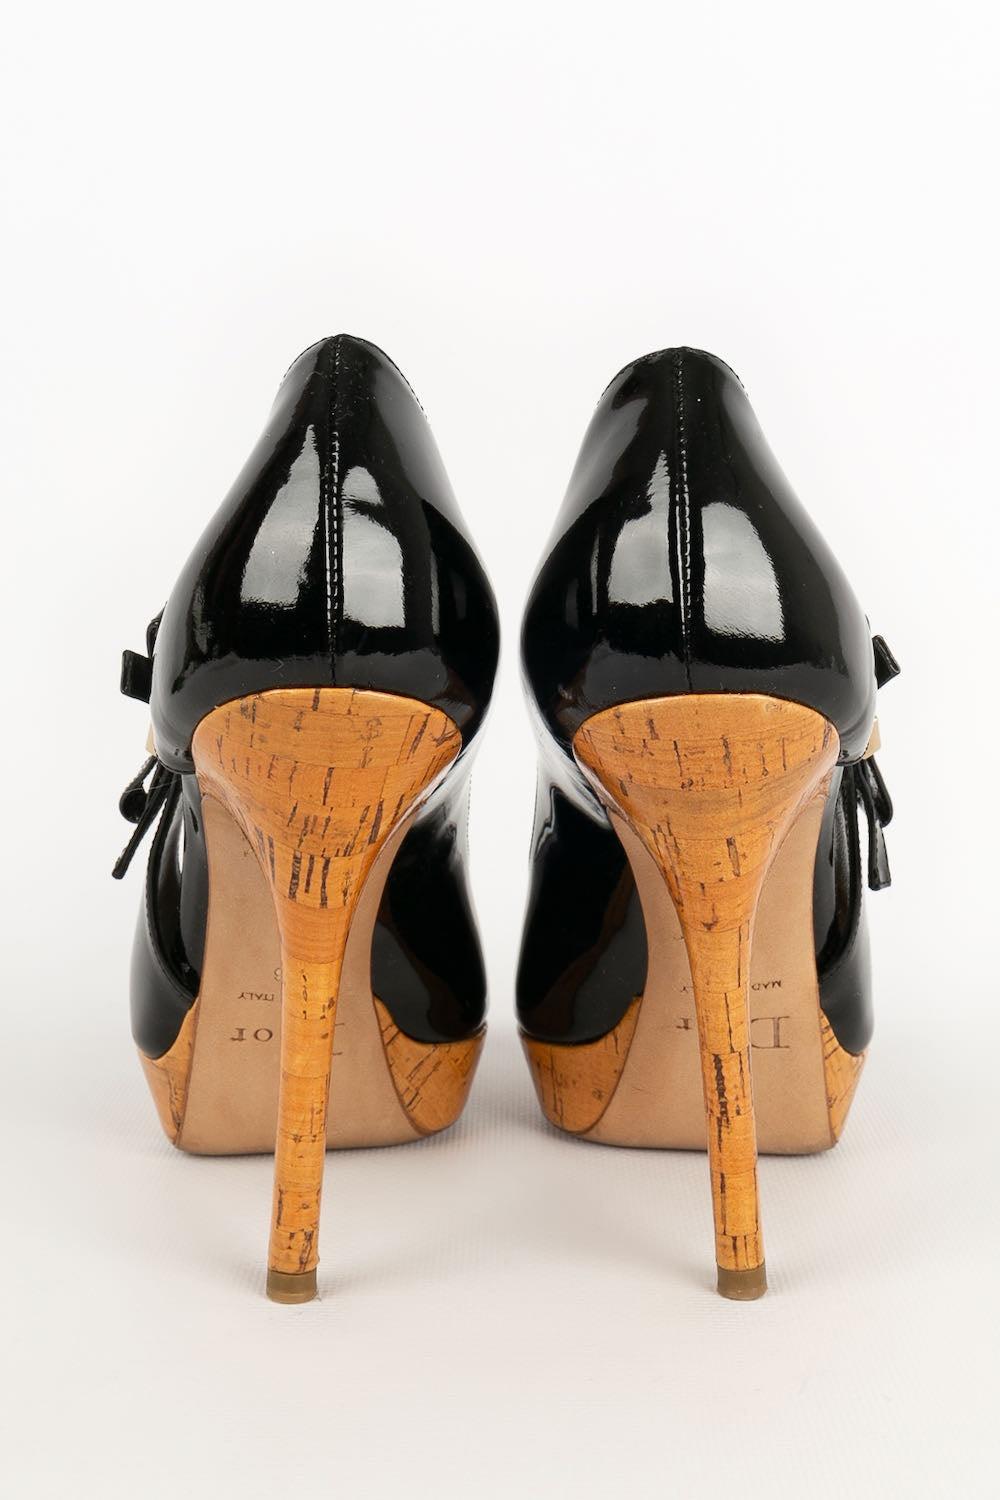 Dior Shoes in Patent Leather Pumps In Good Condition For Sale In SAINT-OUEN-SUR-SEINE, FR